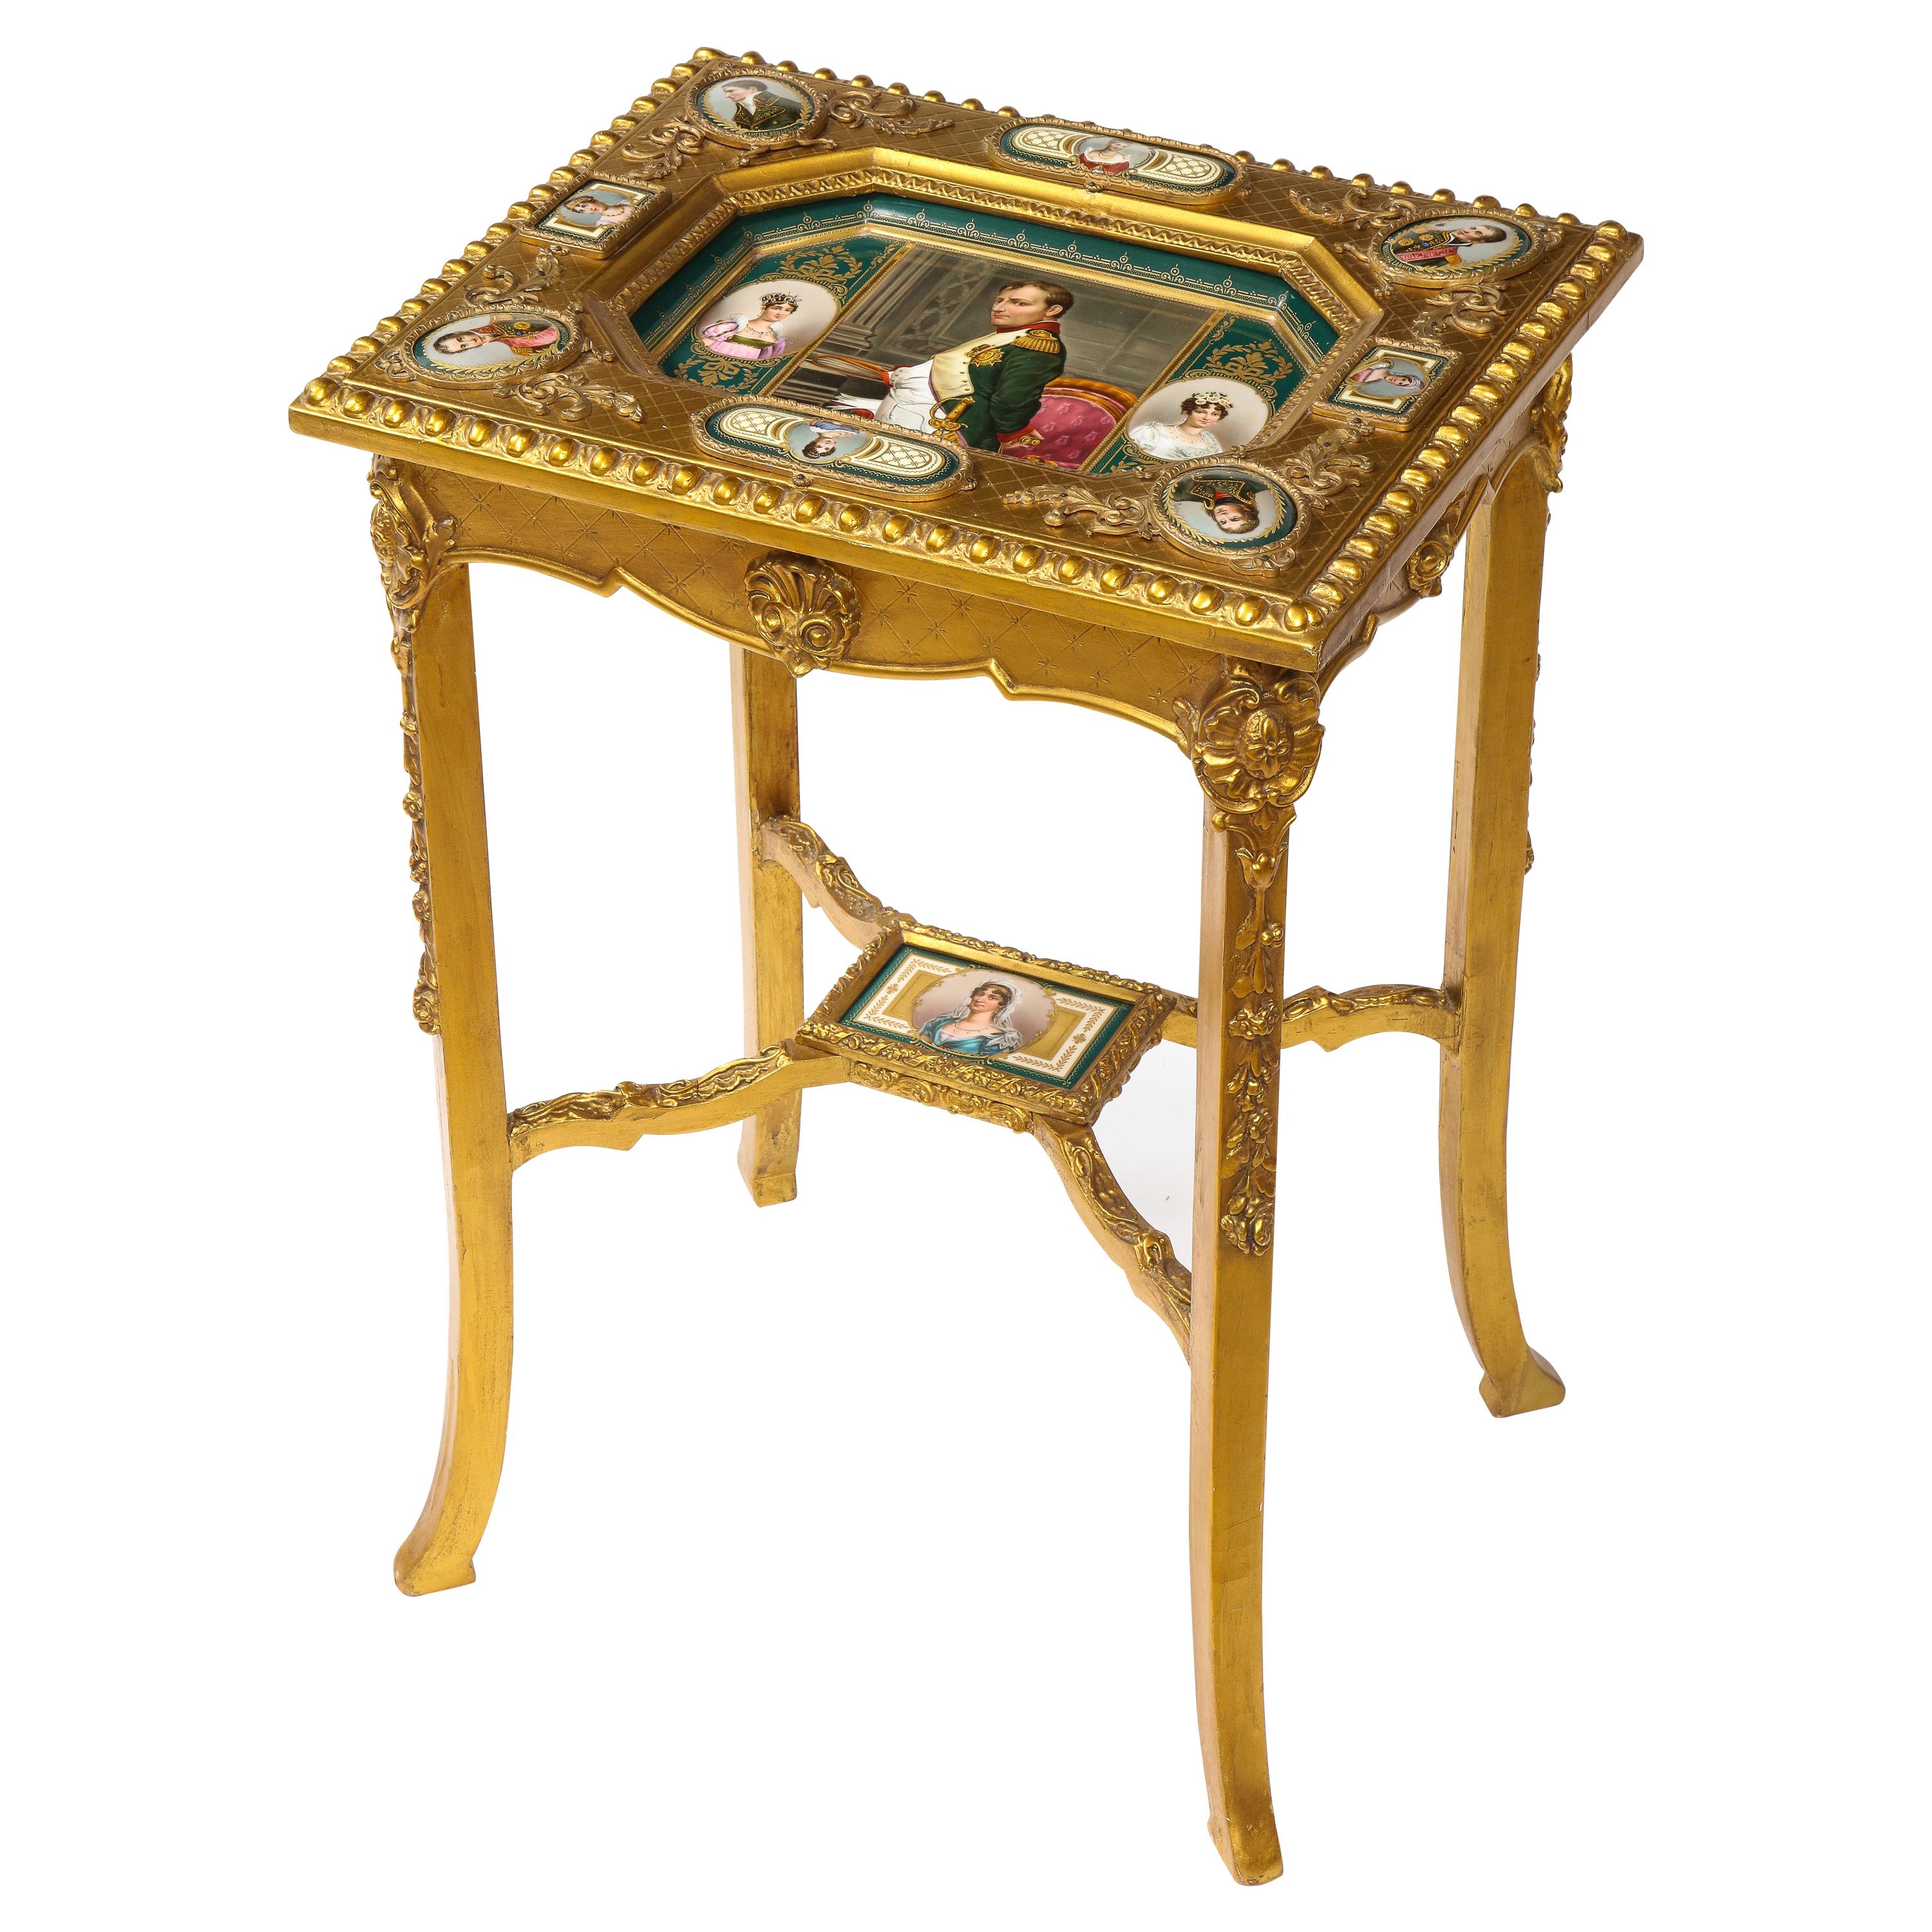 19th C. Napoleonic Royal Vienna Giltwood Side Table w/ Inlaid Porcelain Plaques